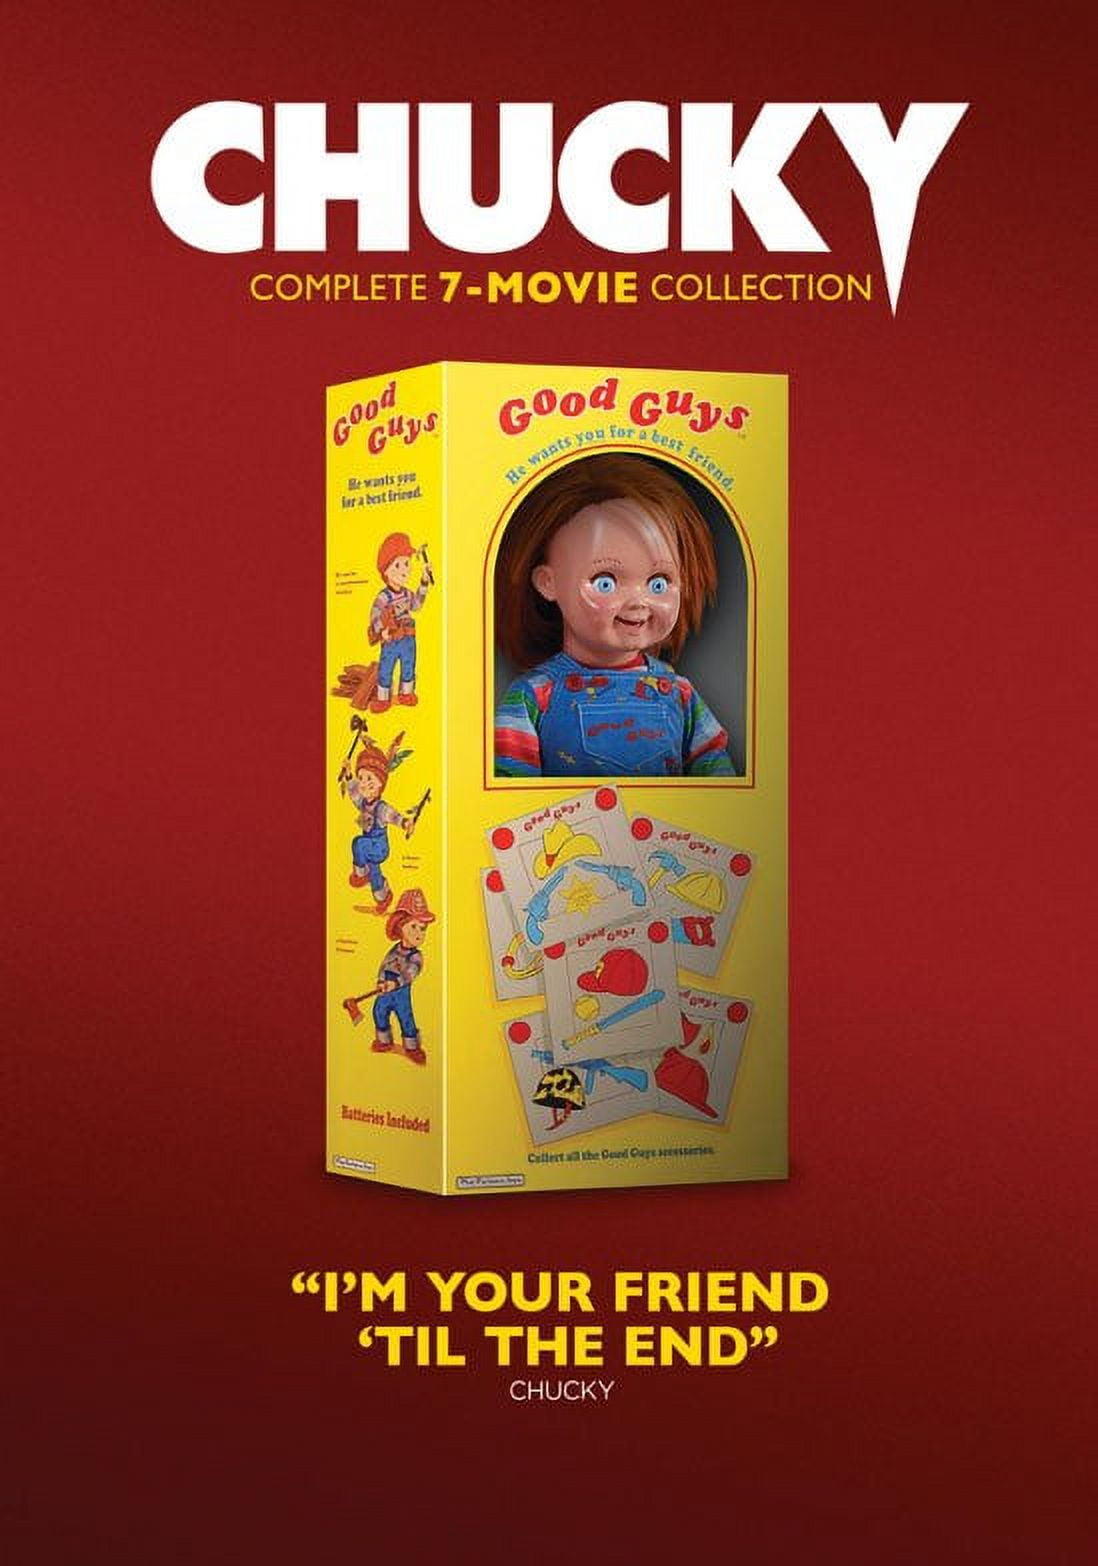 Chucky Complete 7-Movie Collection (DVD)